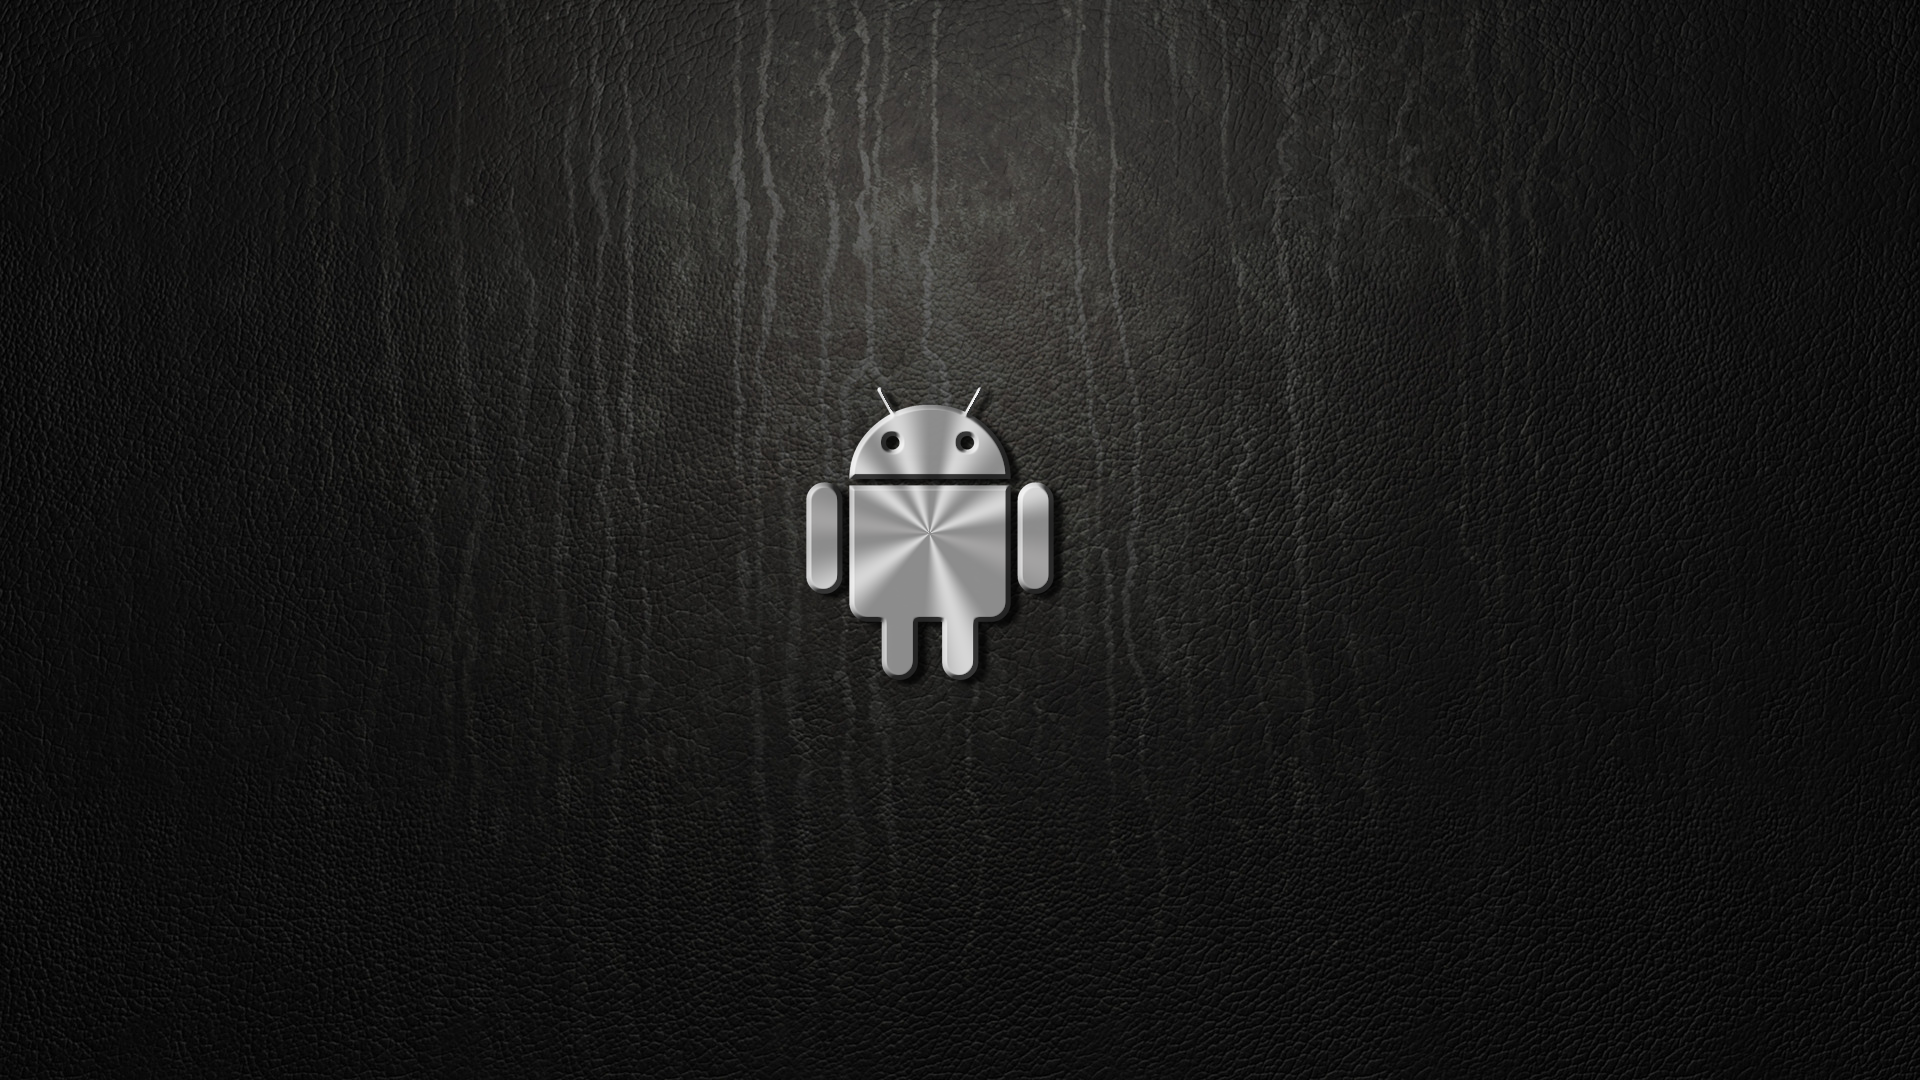 Android Logo Wallpaper F4T | Free HD Wallpapers for Desktop Background